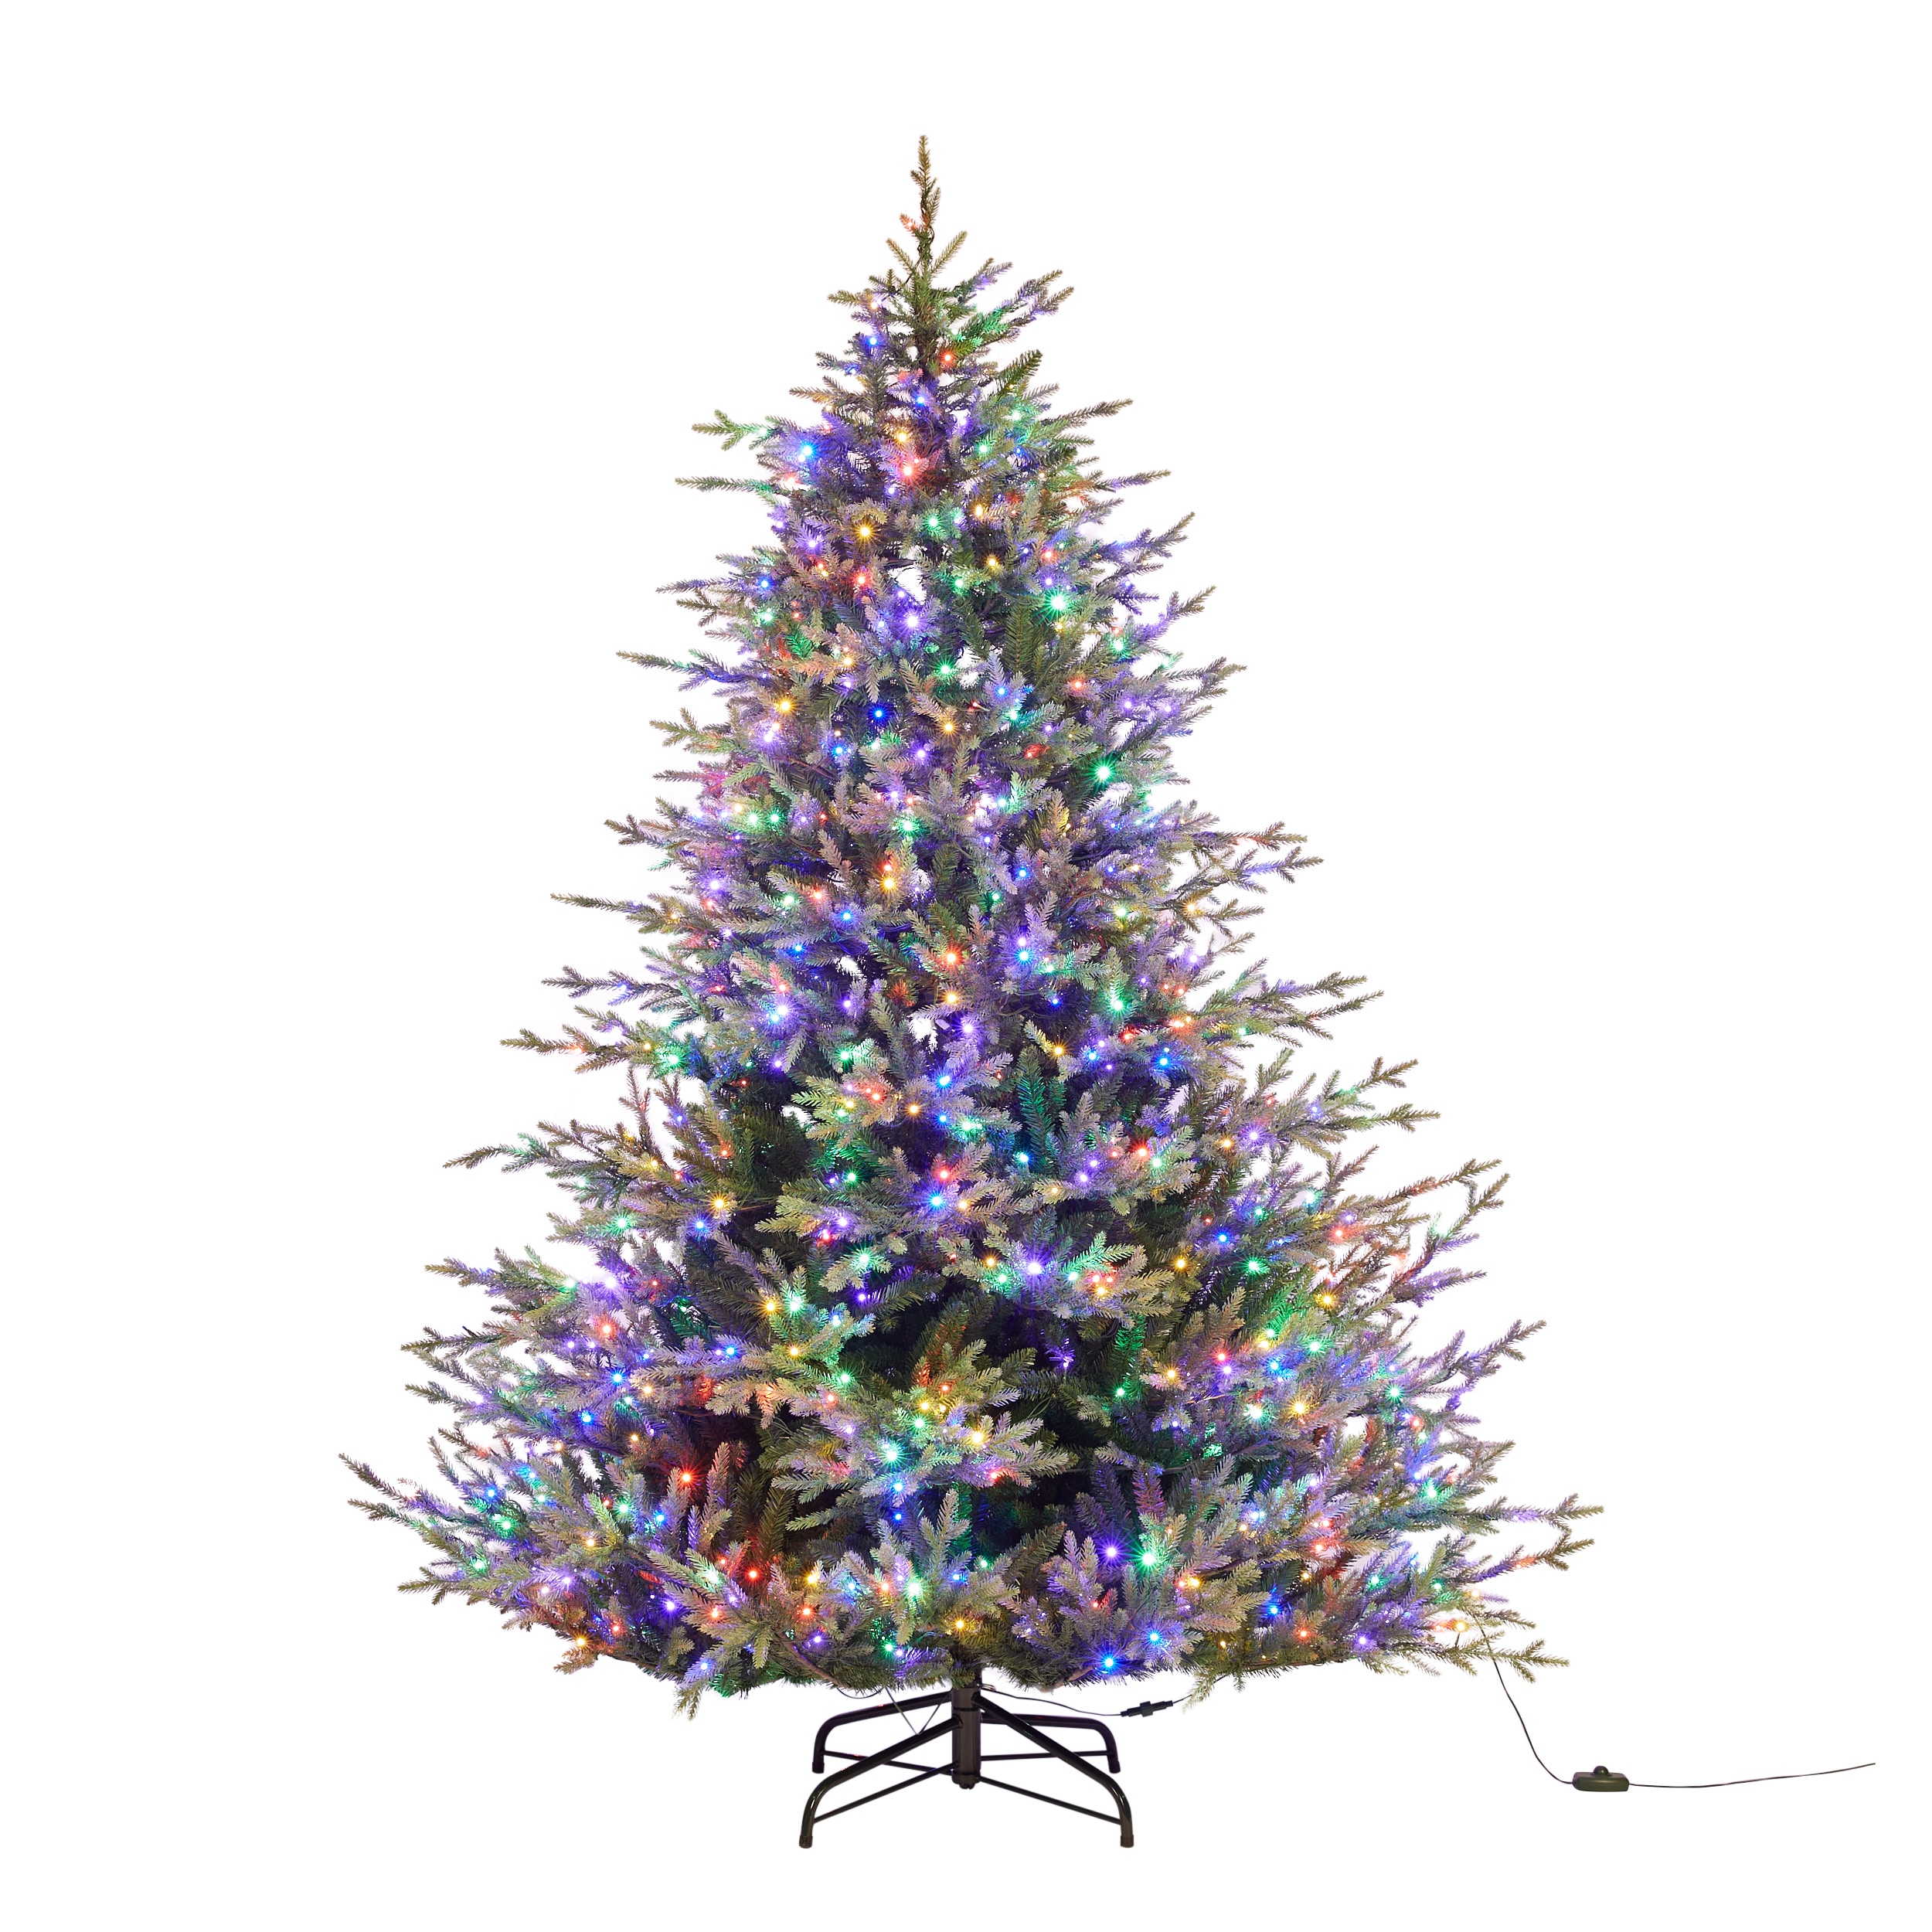 LED BLUE EVERYDAY BOW 9" 36 Lights Battery Operated Christmas Tree Toppers Decor 